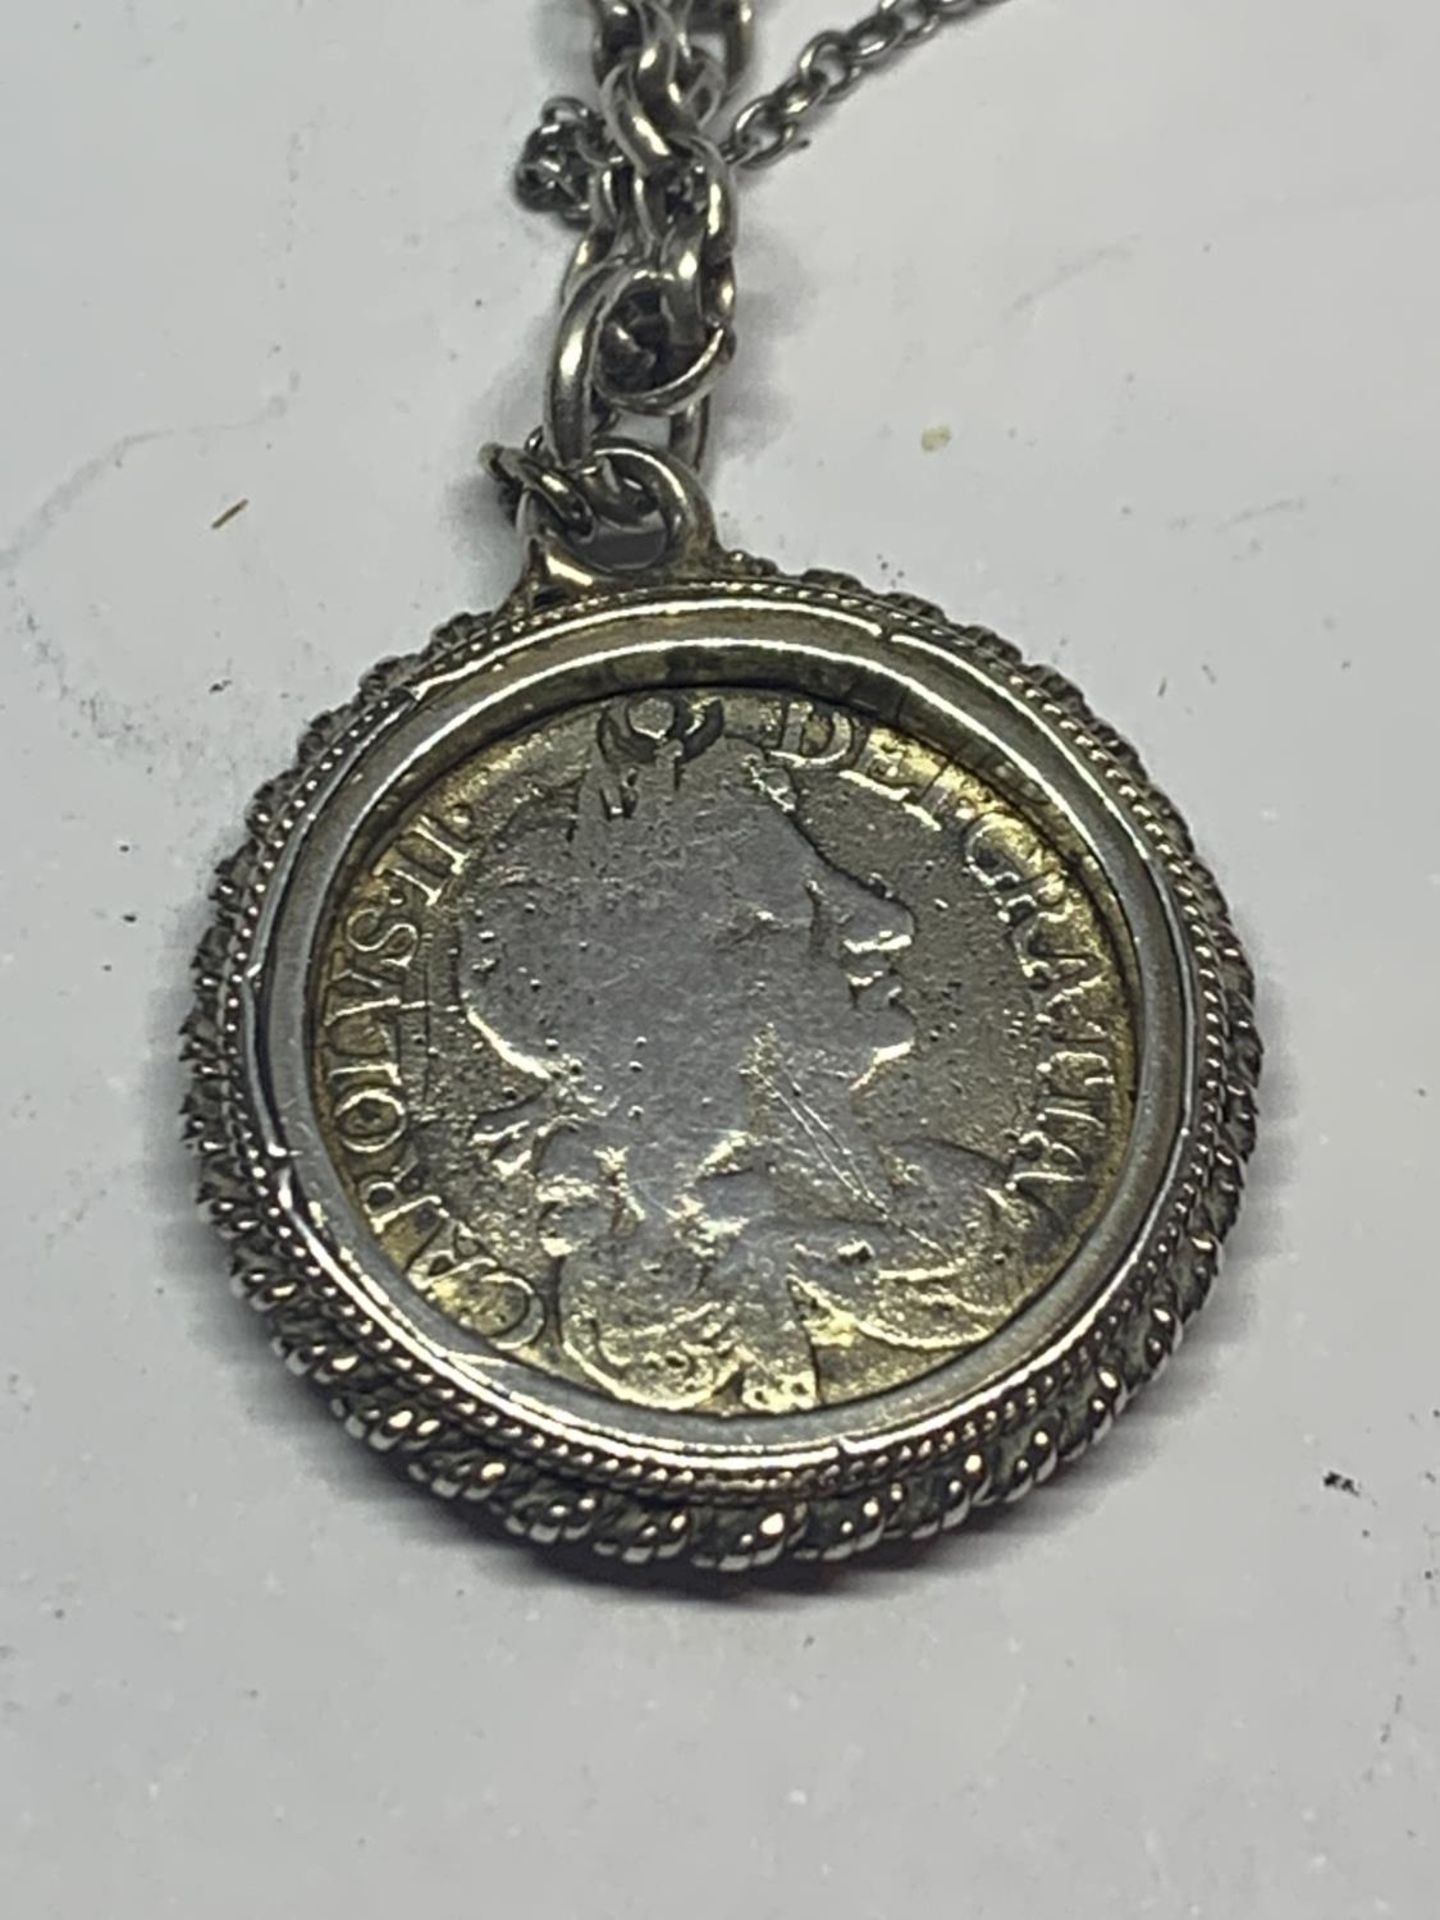 A SILVER GEORGE III FOUR PENCE IN A MOUNT ON A CHAIN WITH A PRESENTATION BOX - Image 3 of 3